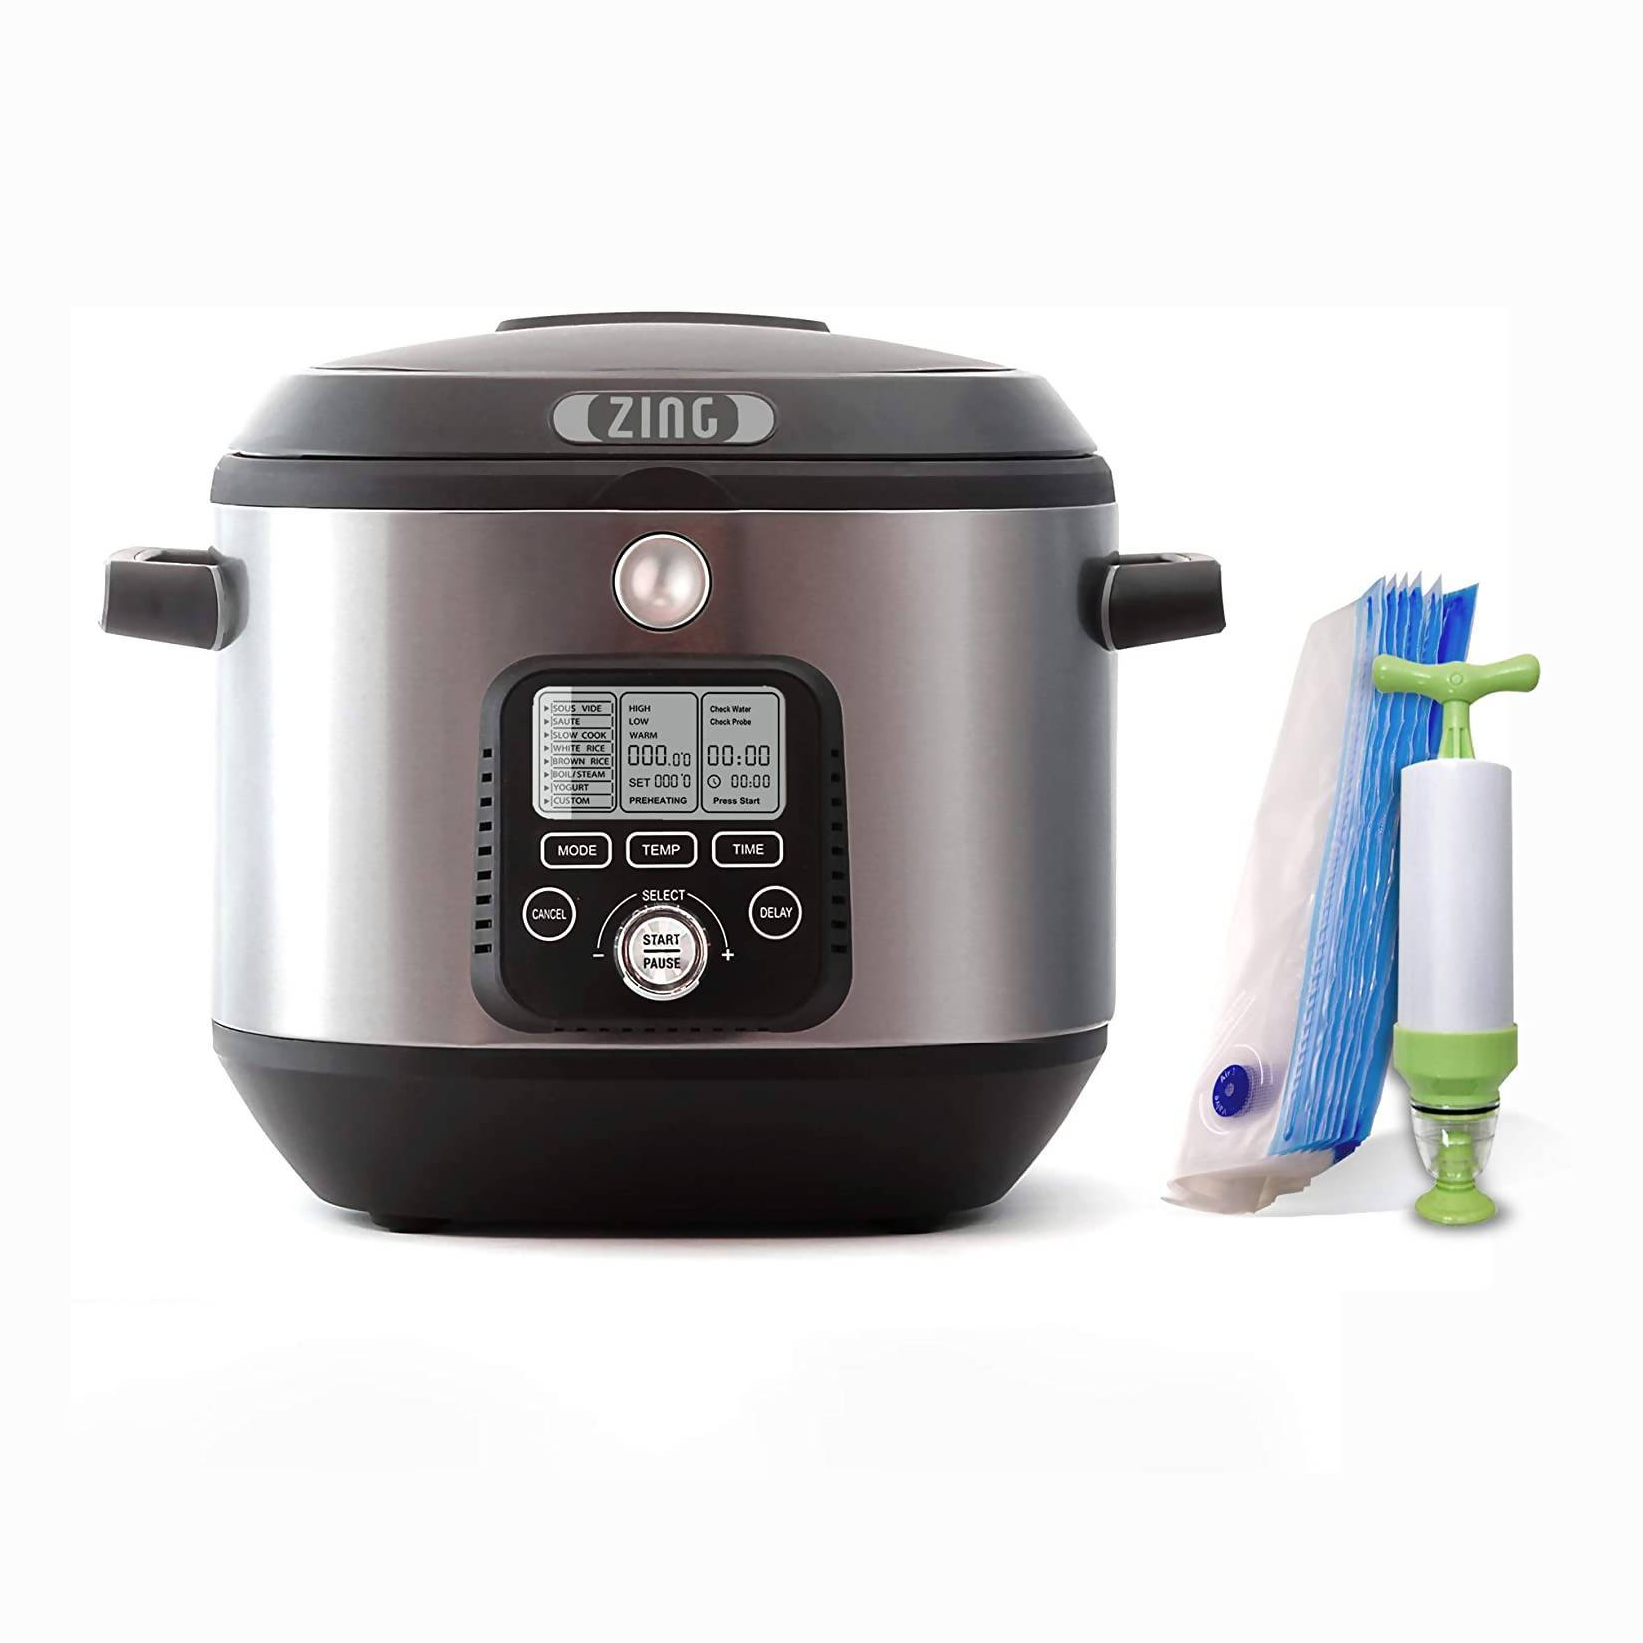 jury officiel Resonate Promotion] Zing Cook Multi-Cooker with Sous Vide & Slow Cooking Funct - ODK  Shop